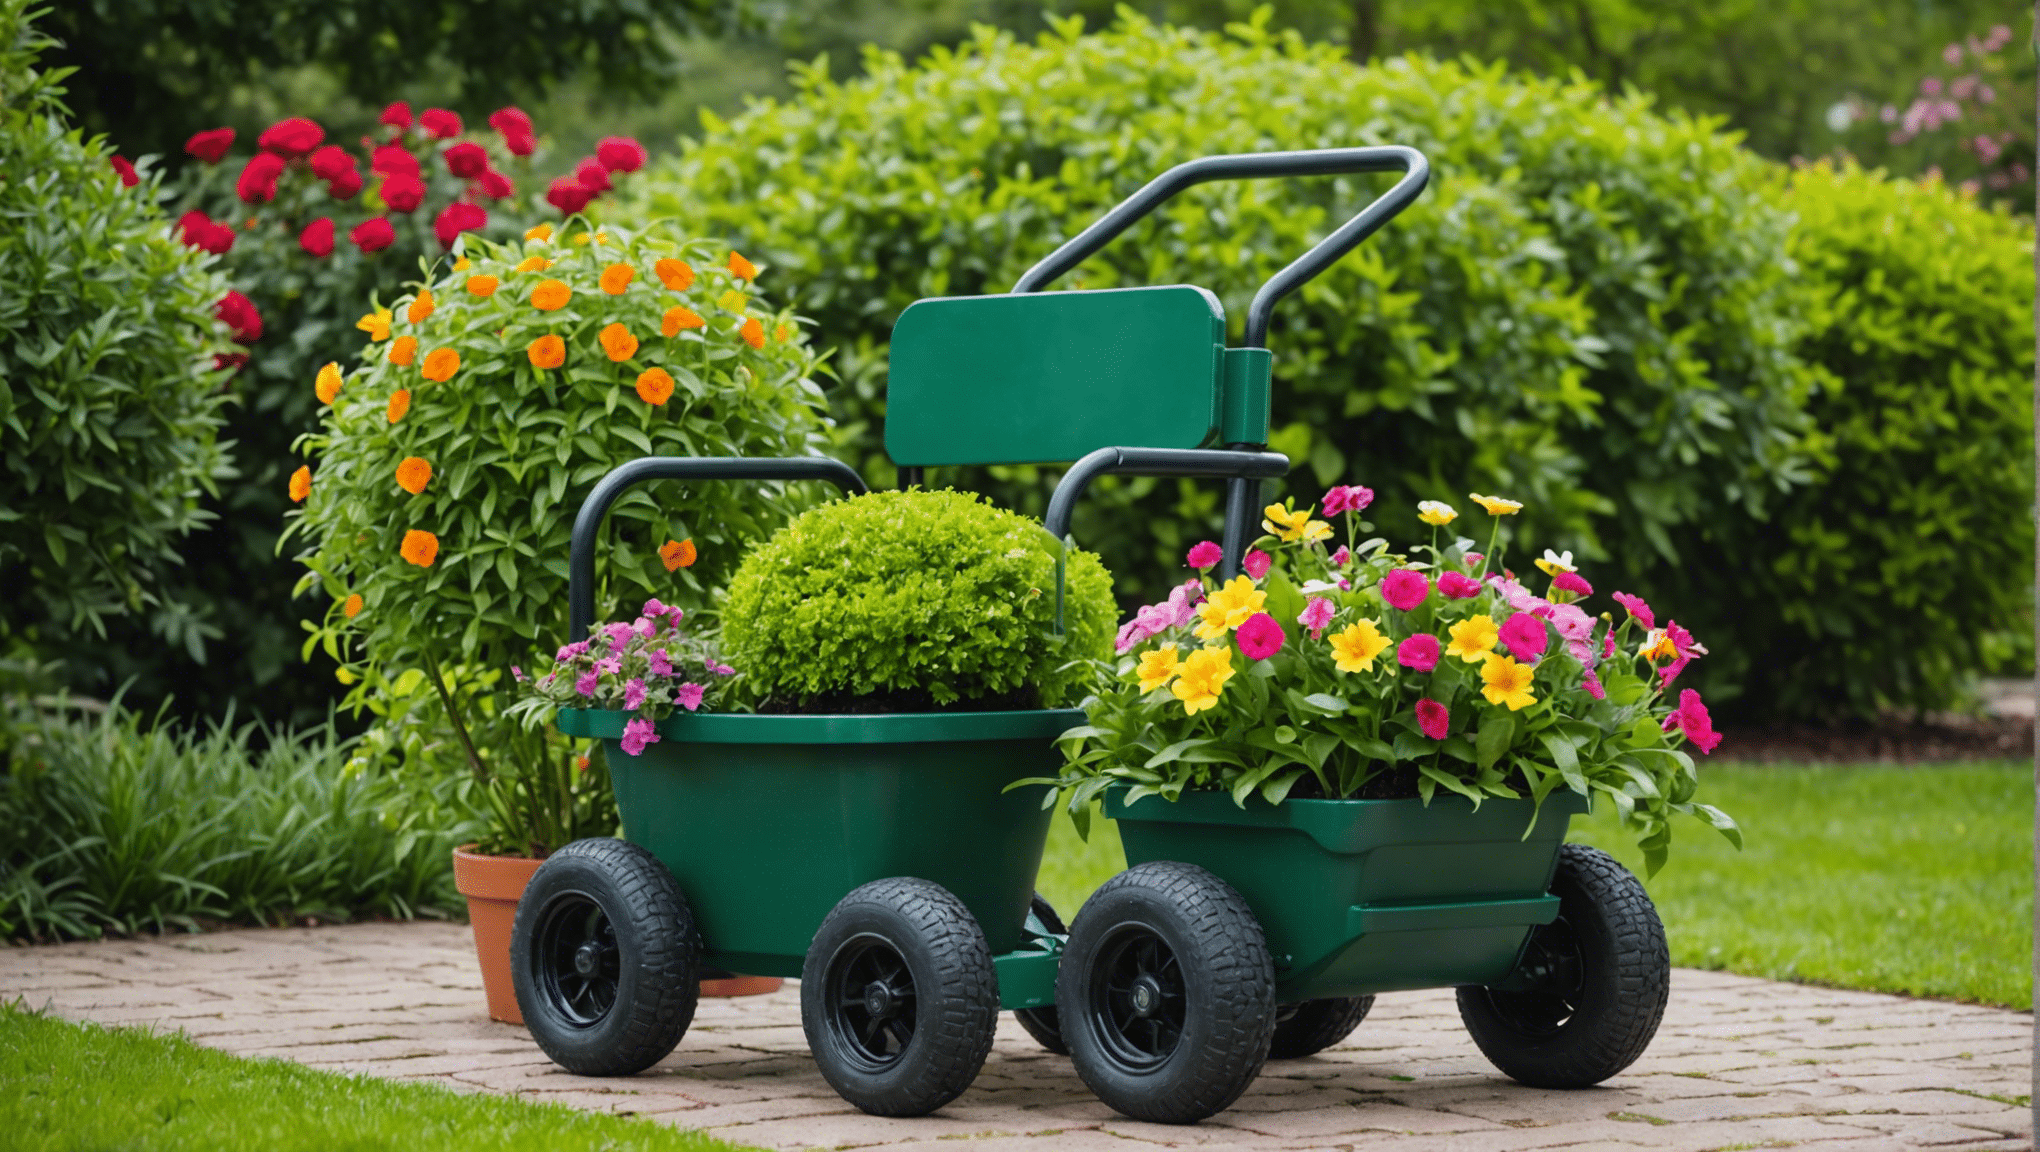 discover the benefits of investing in a gardening seat with wheels and enjoy a comfortable and efficient gardening experience. find out how it can make your gardening tasks easier and more enjoyable.